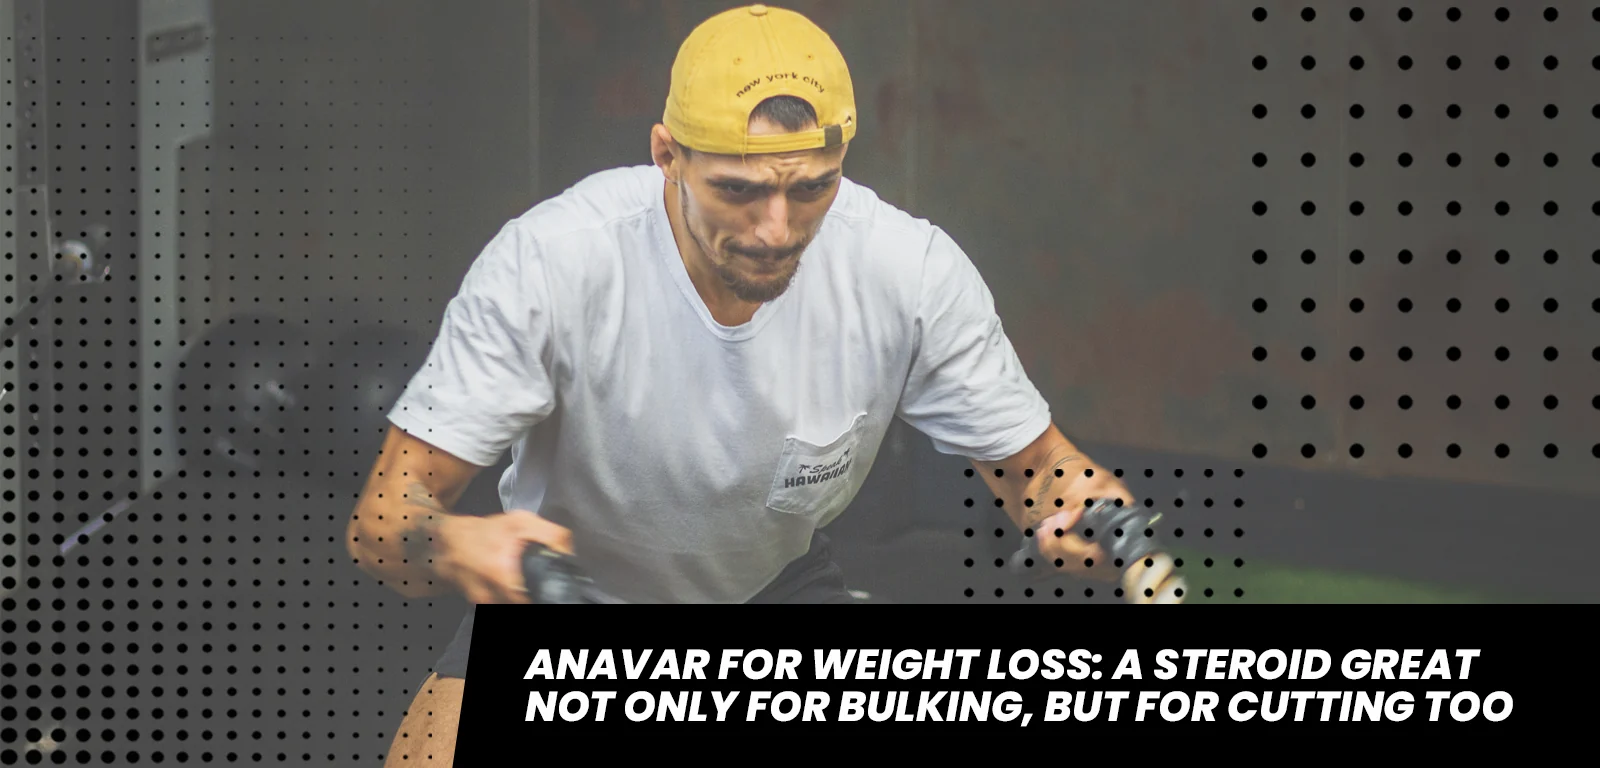 Anavar for weight loss